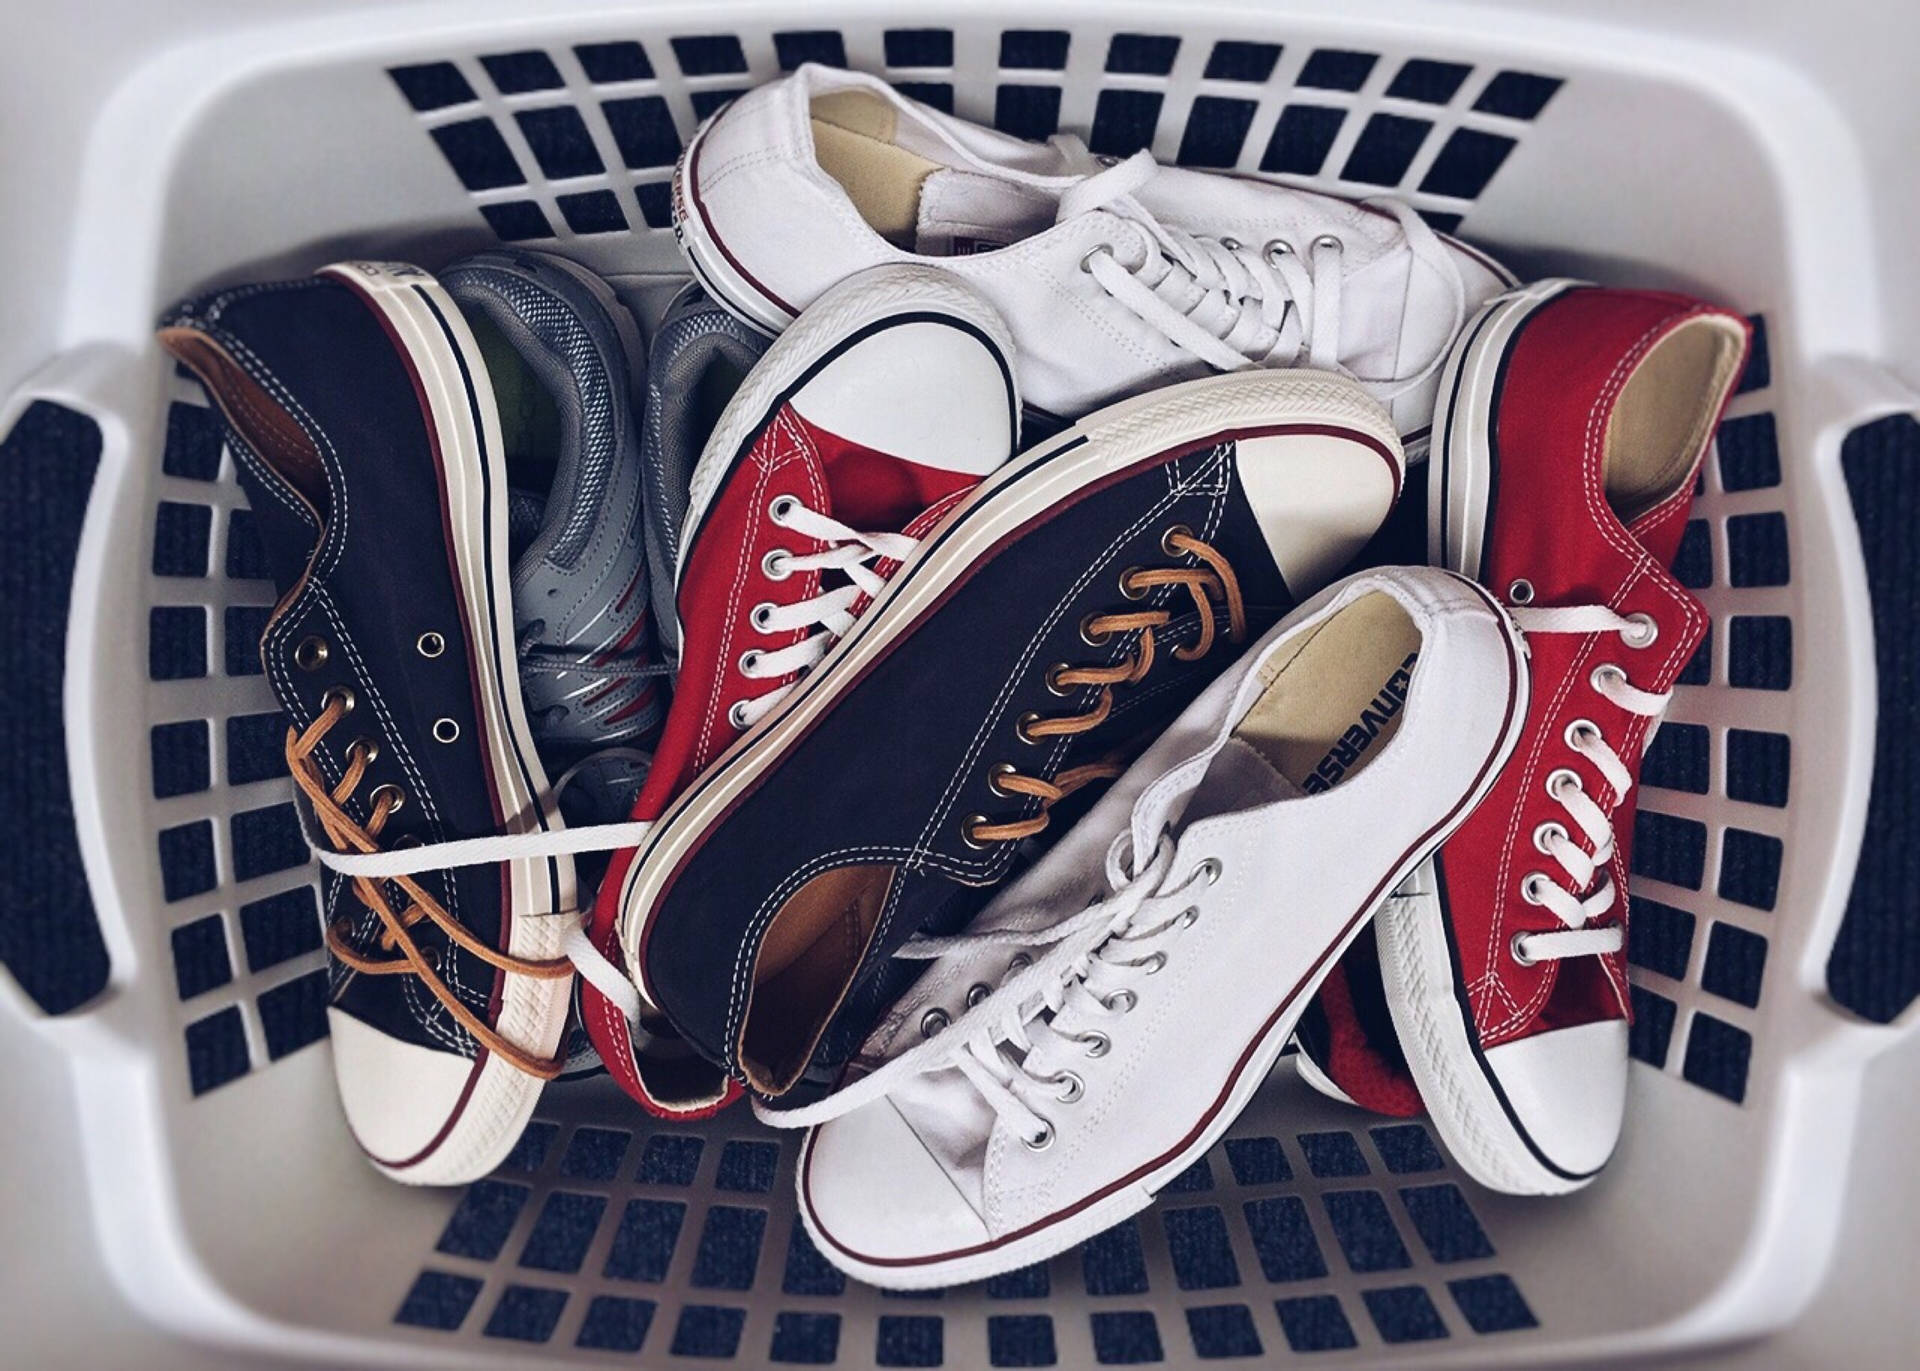 Basket Of Shoes